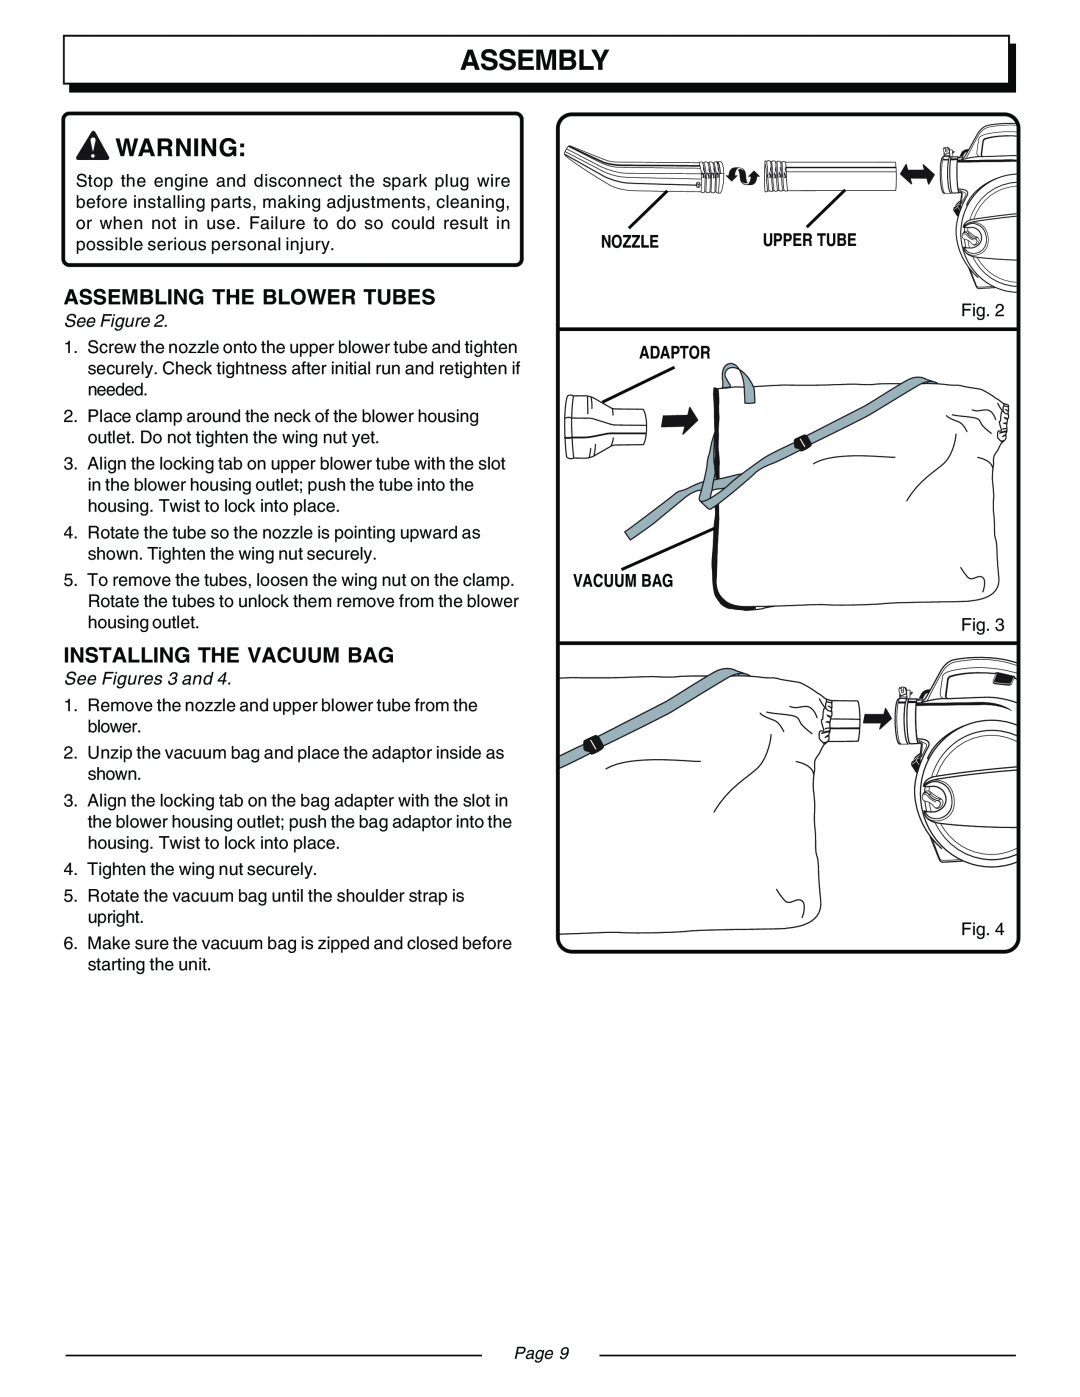 Homelite UT08540, UT08541 manual Assembly, See Figures 3 and, Nozzle, Adaptor Vacuum Bag, Page 